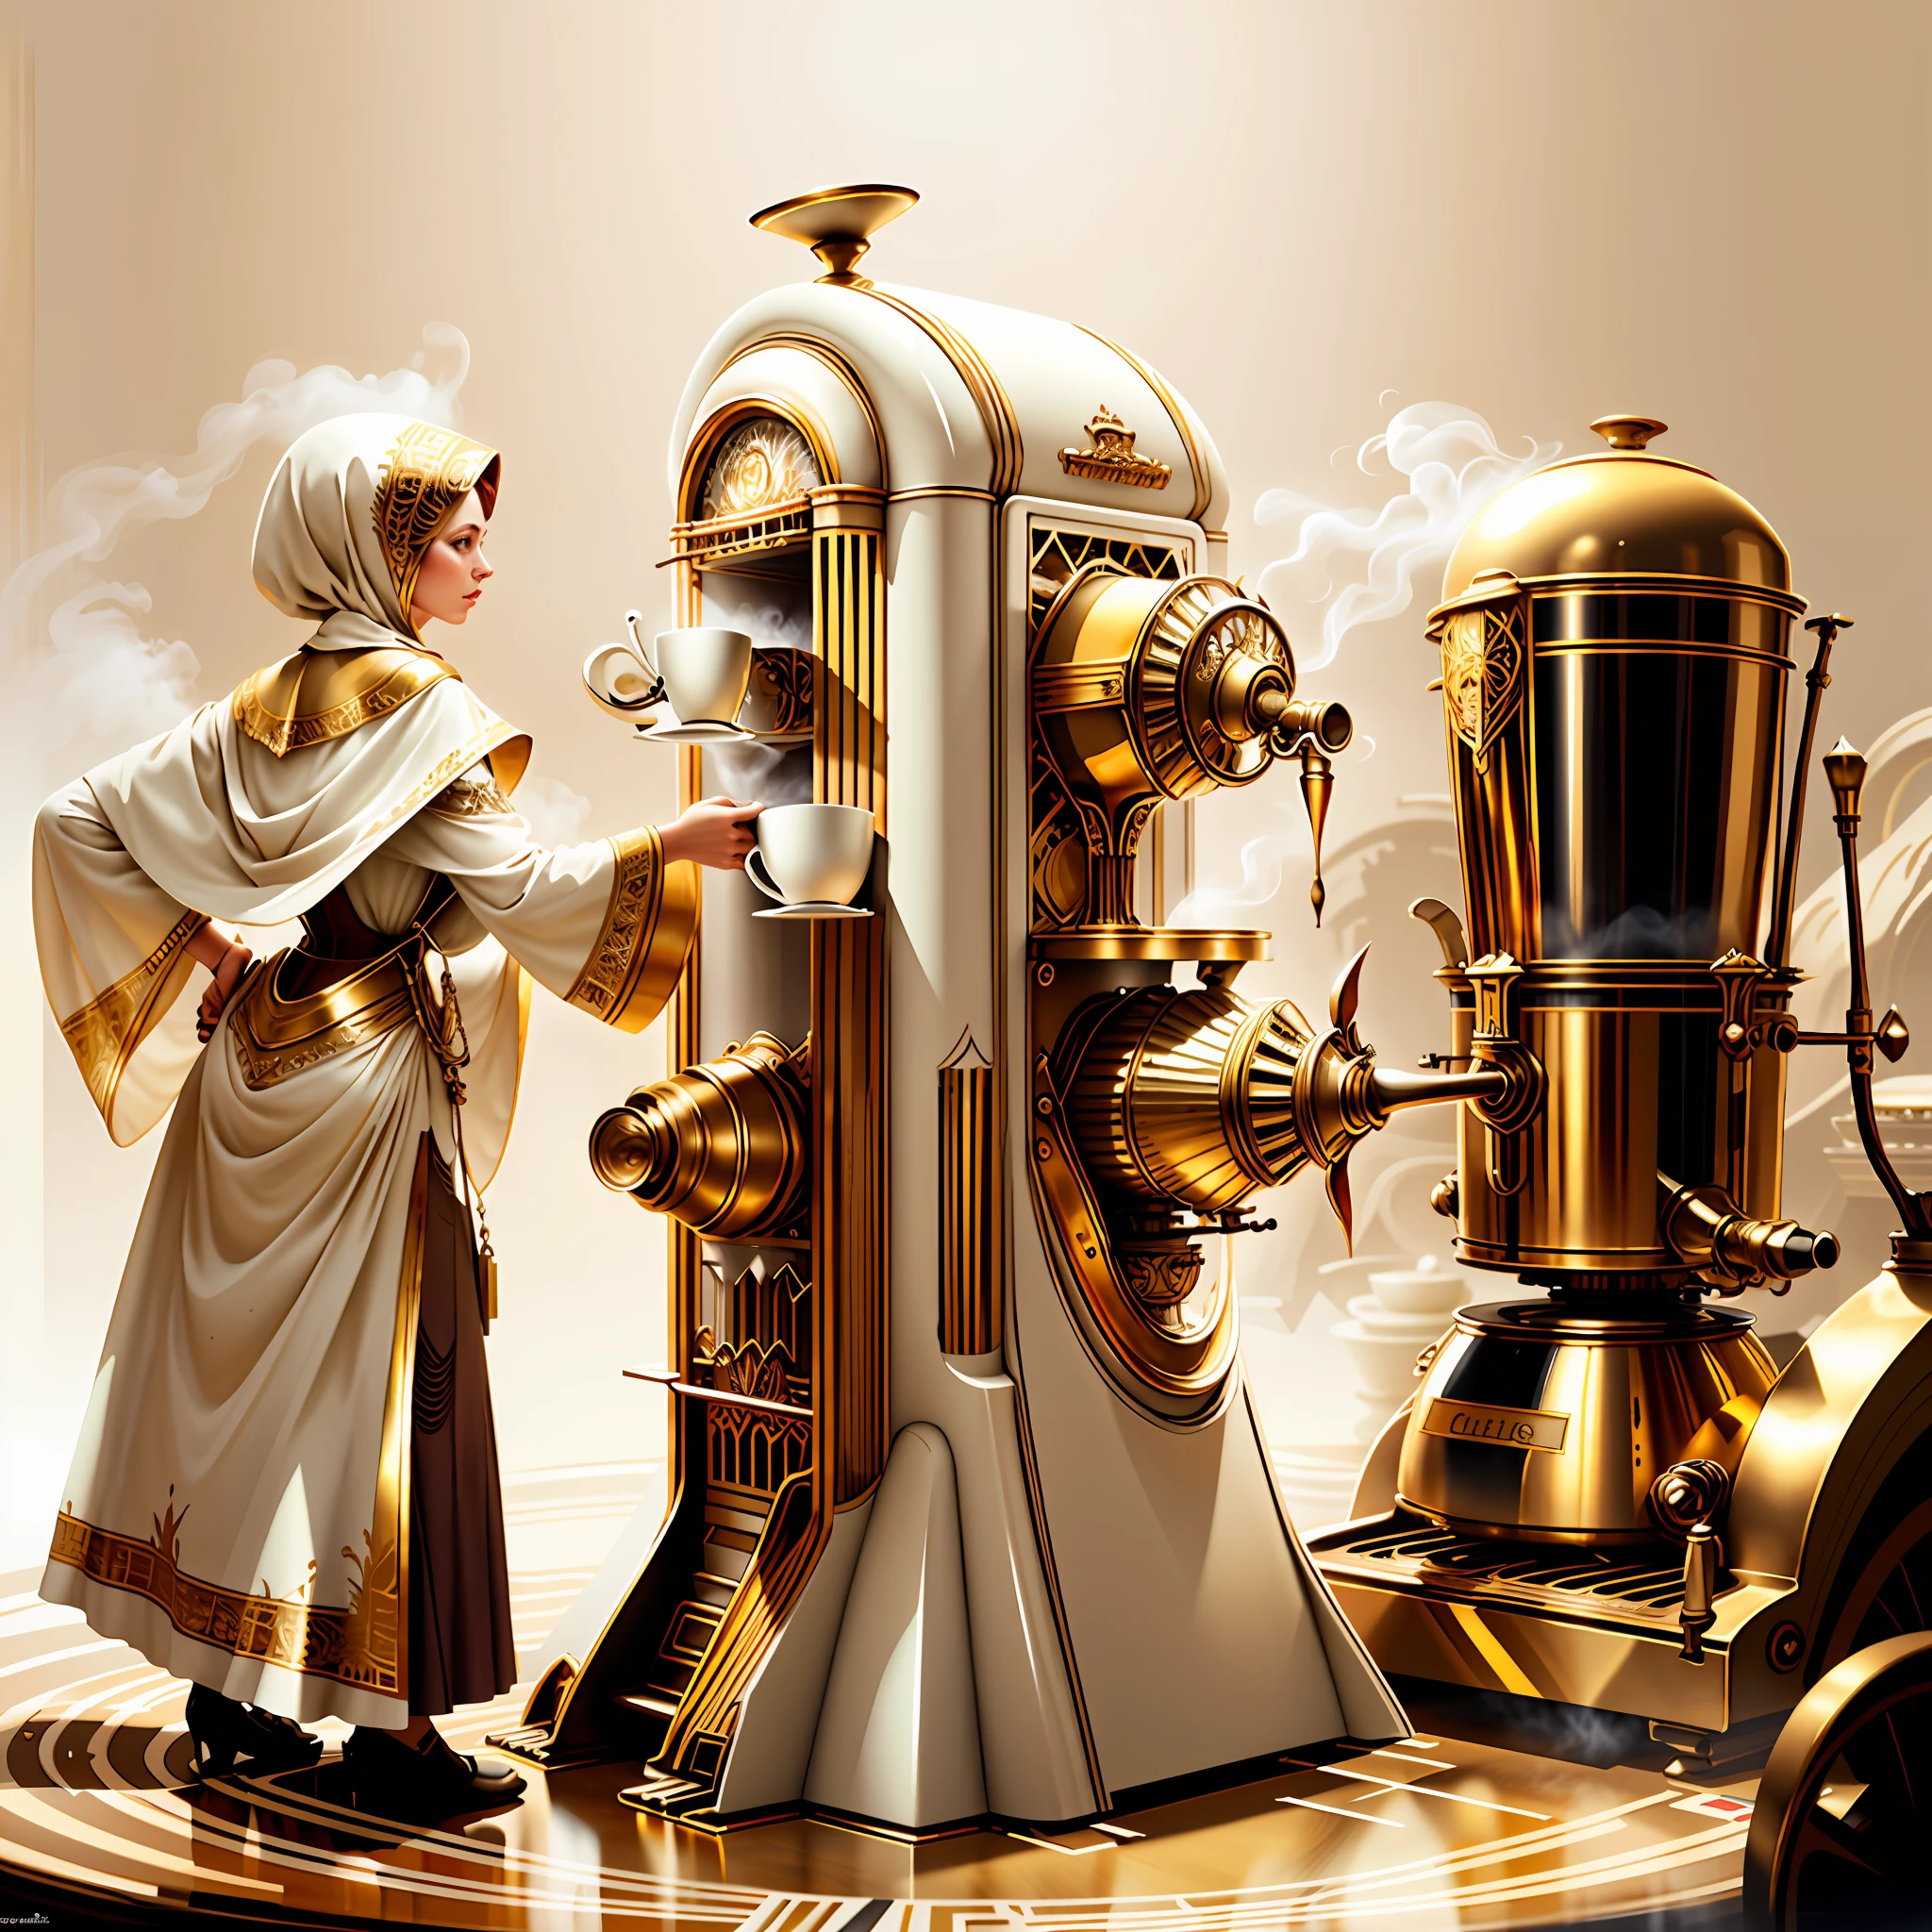 concept art, white background, 
ArtDecoAI Gold
coffee machine 
Circumstantiated woman in the background